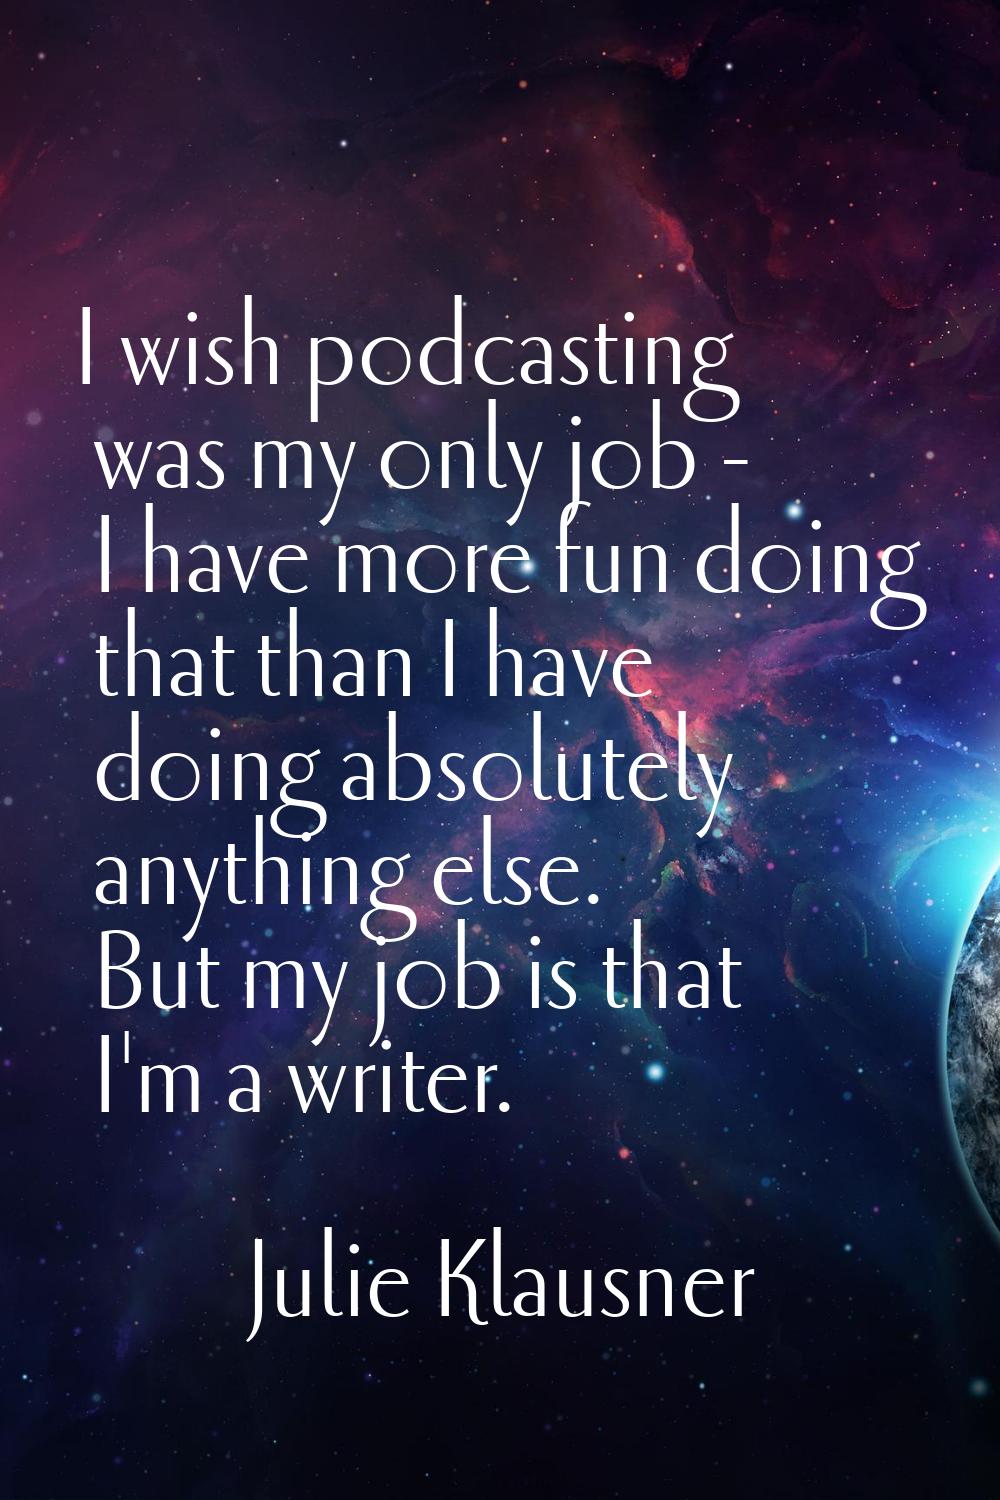 I wish podcasting was my only job - I have more fun doing that than I have doing absolutely anythin